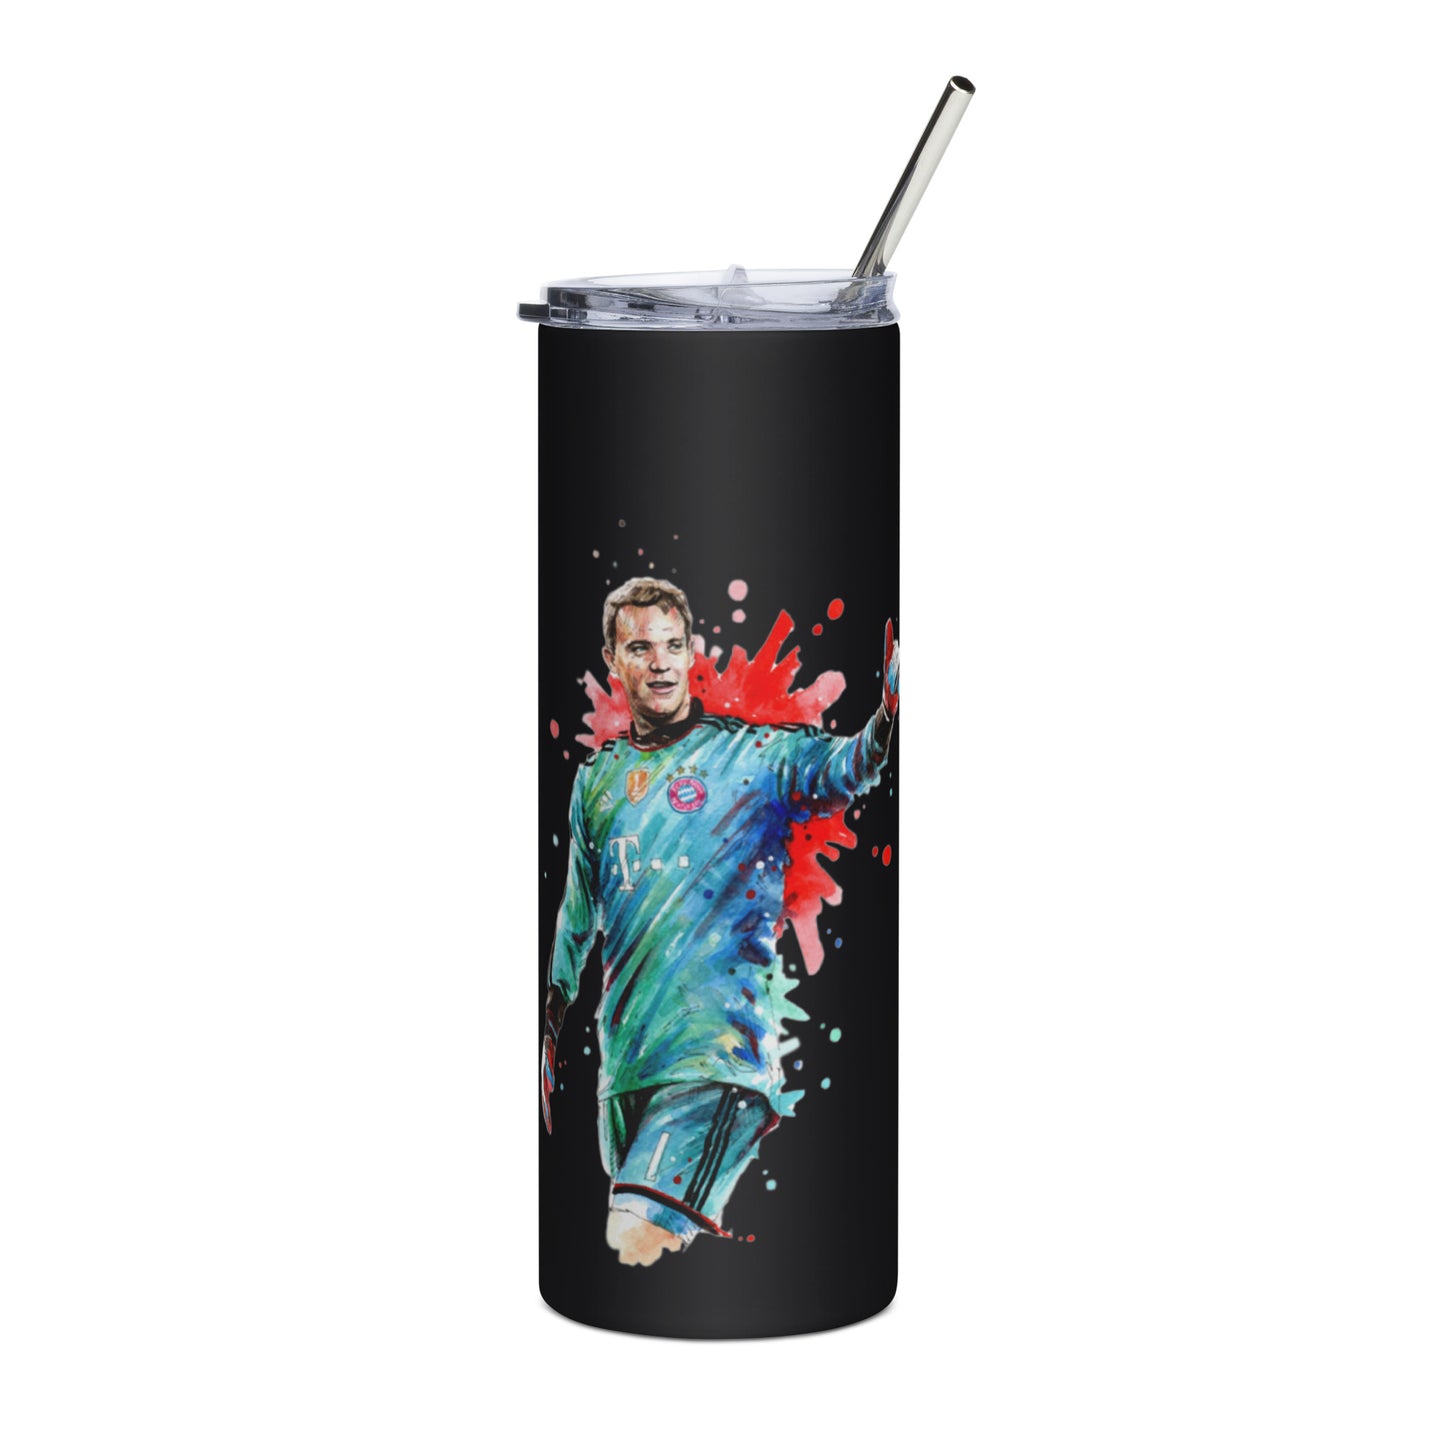 Bayern Neuer Vintage Stainless steel tumbler - The 90+ Minute